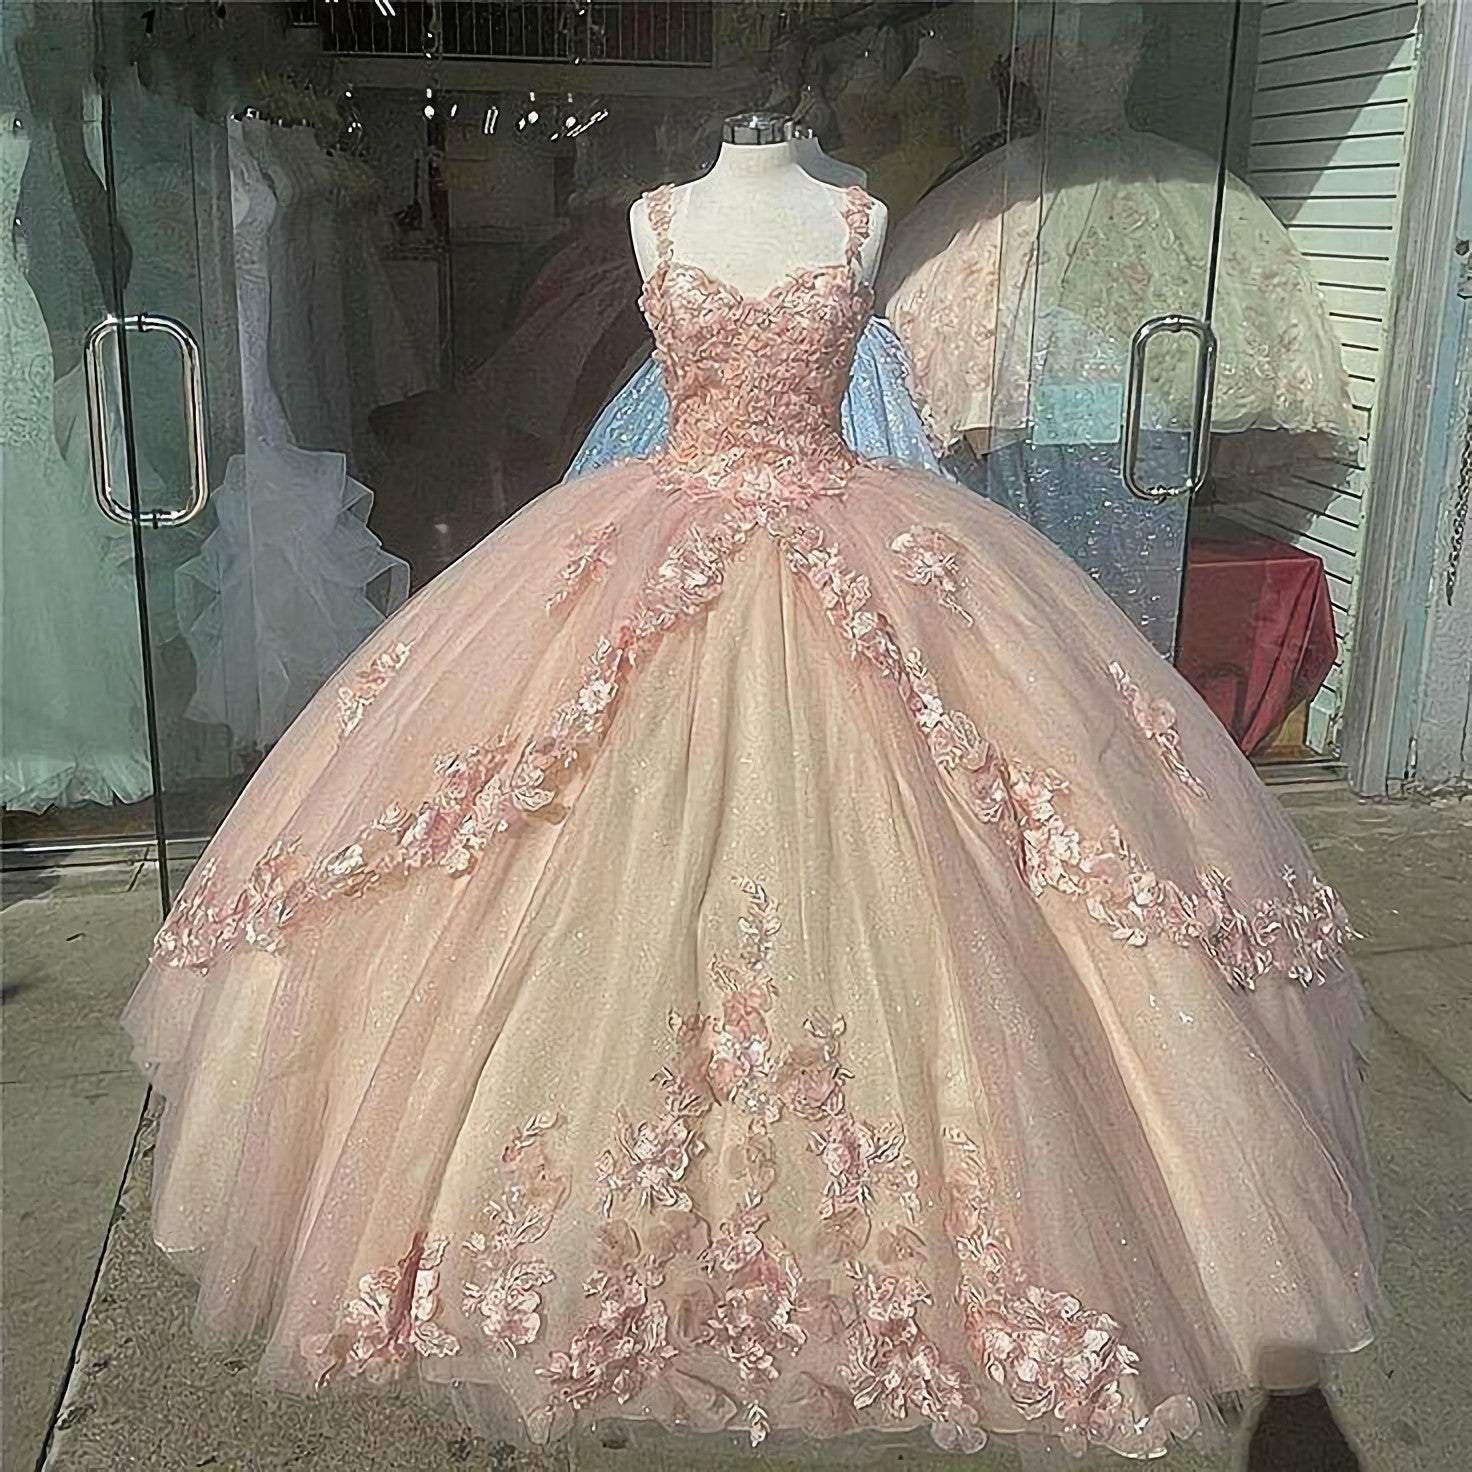 Prom Dresses Long Formal Evening Gown, Pink Sparkly Quinceanera Prom Dresses, Lace Flower Sweet 16 Tulle Party Ball Gown